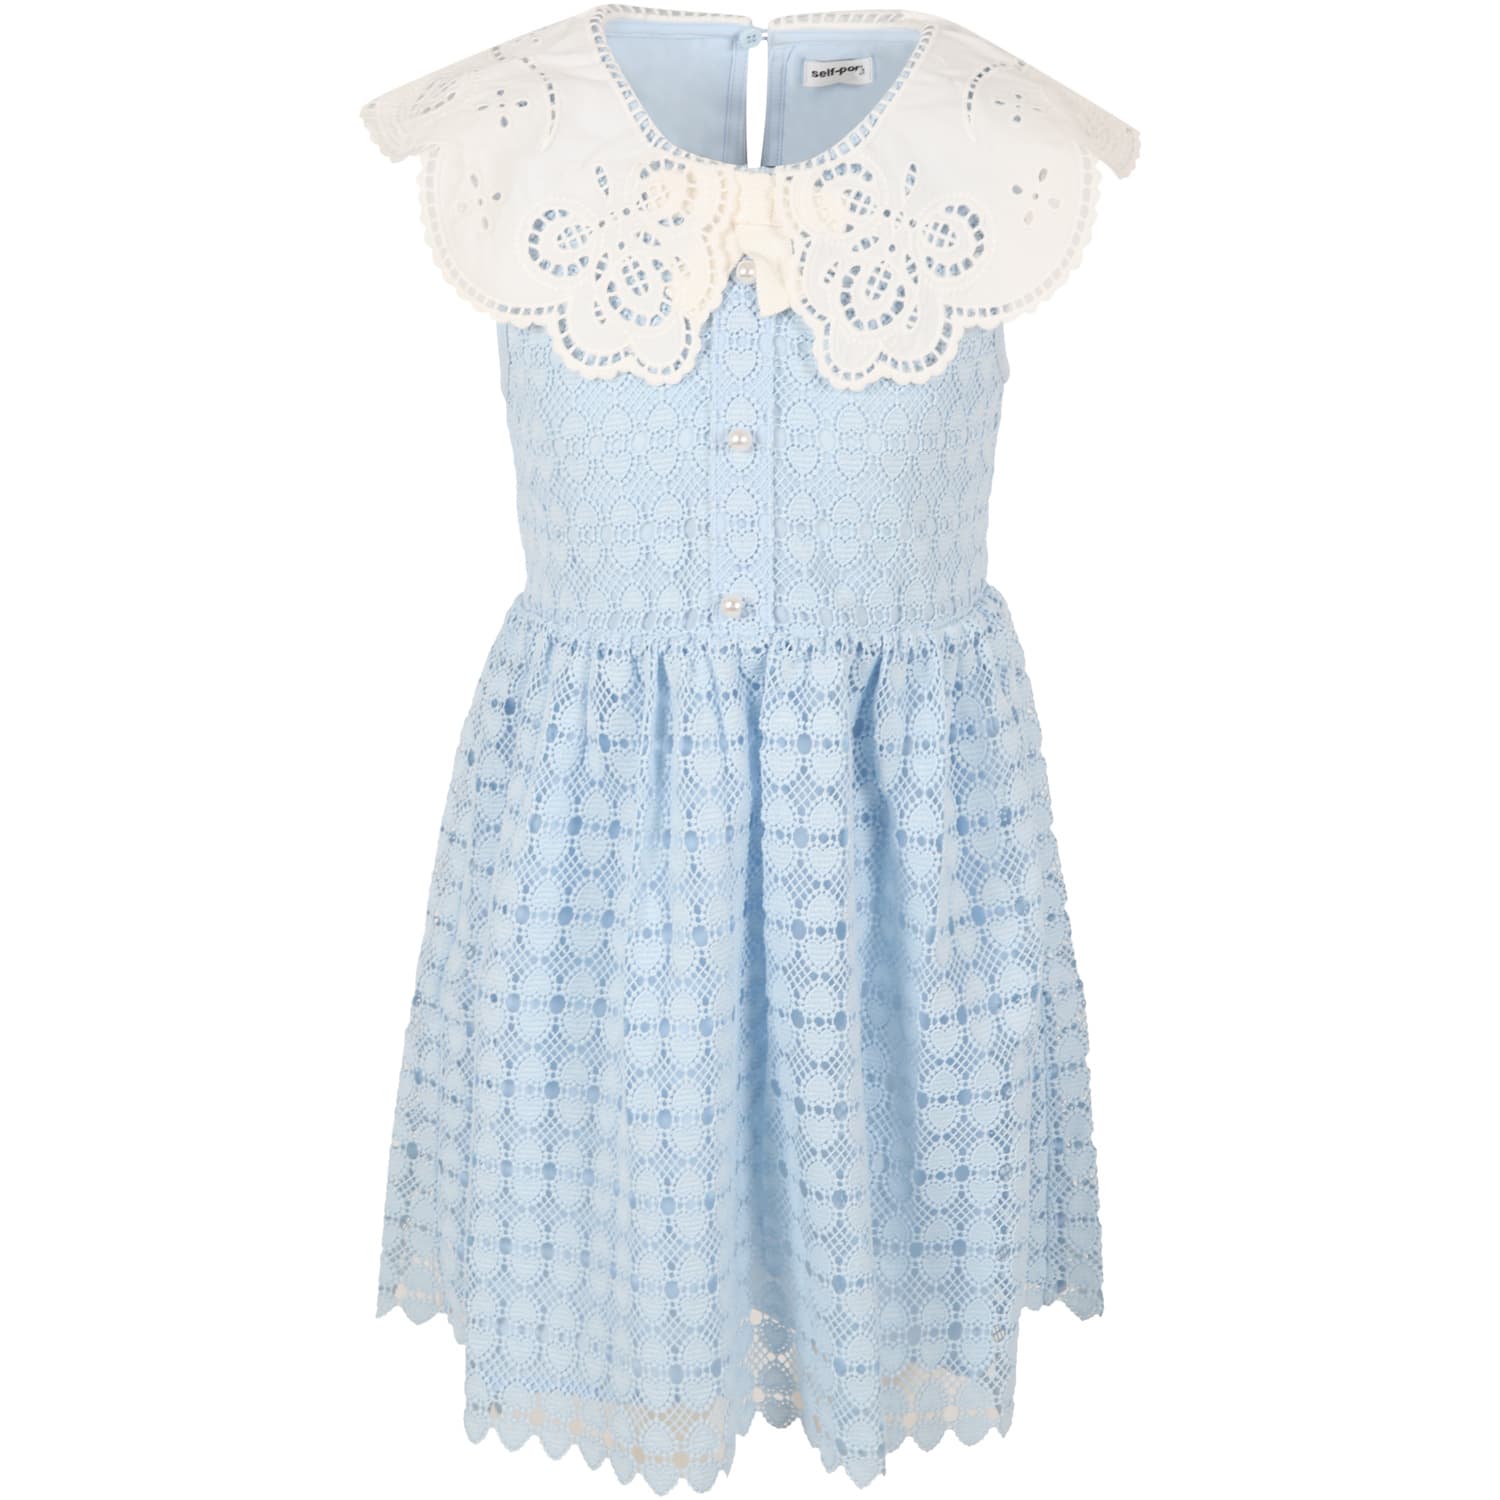 self-portrait Light Blue Dress For Girl With Hearts